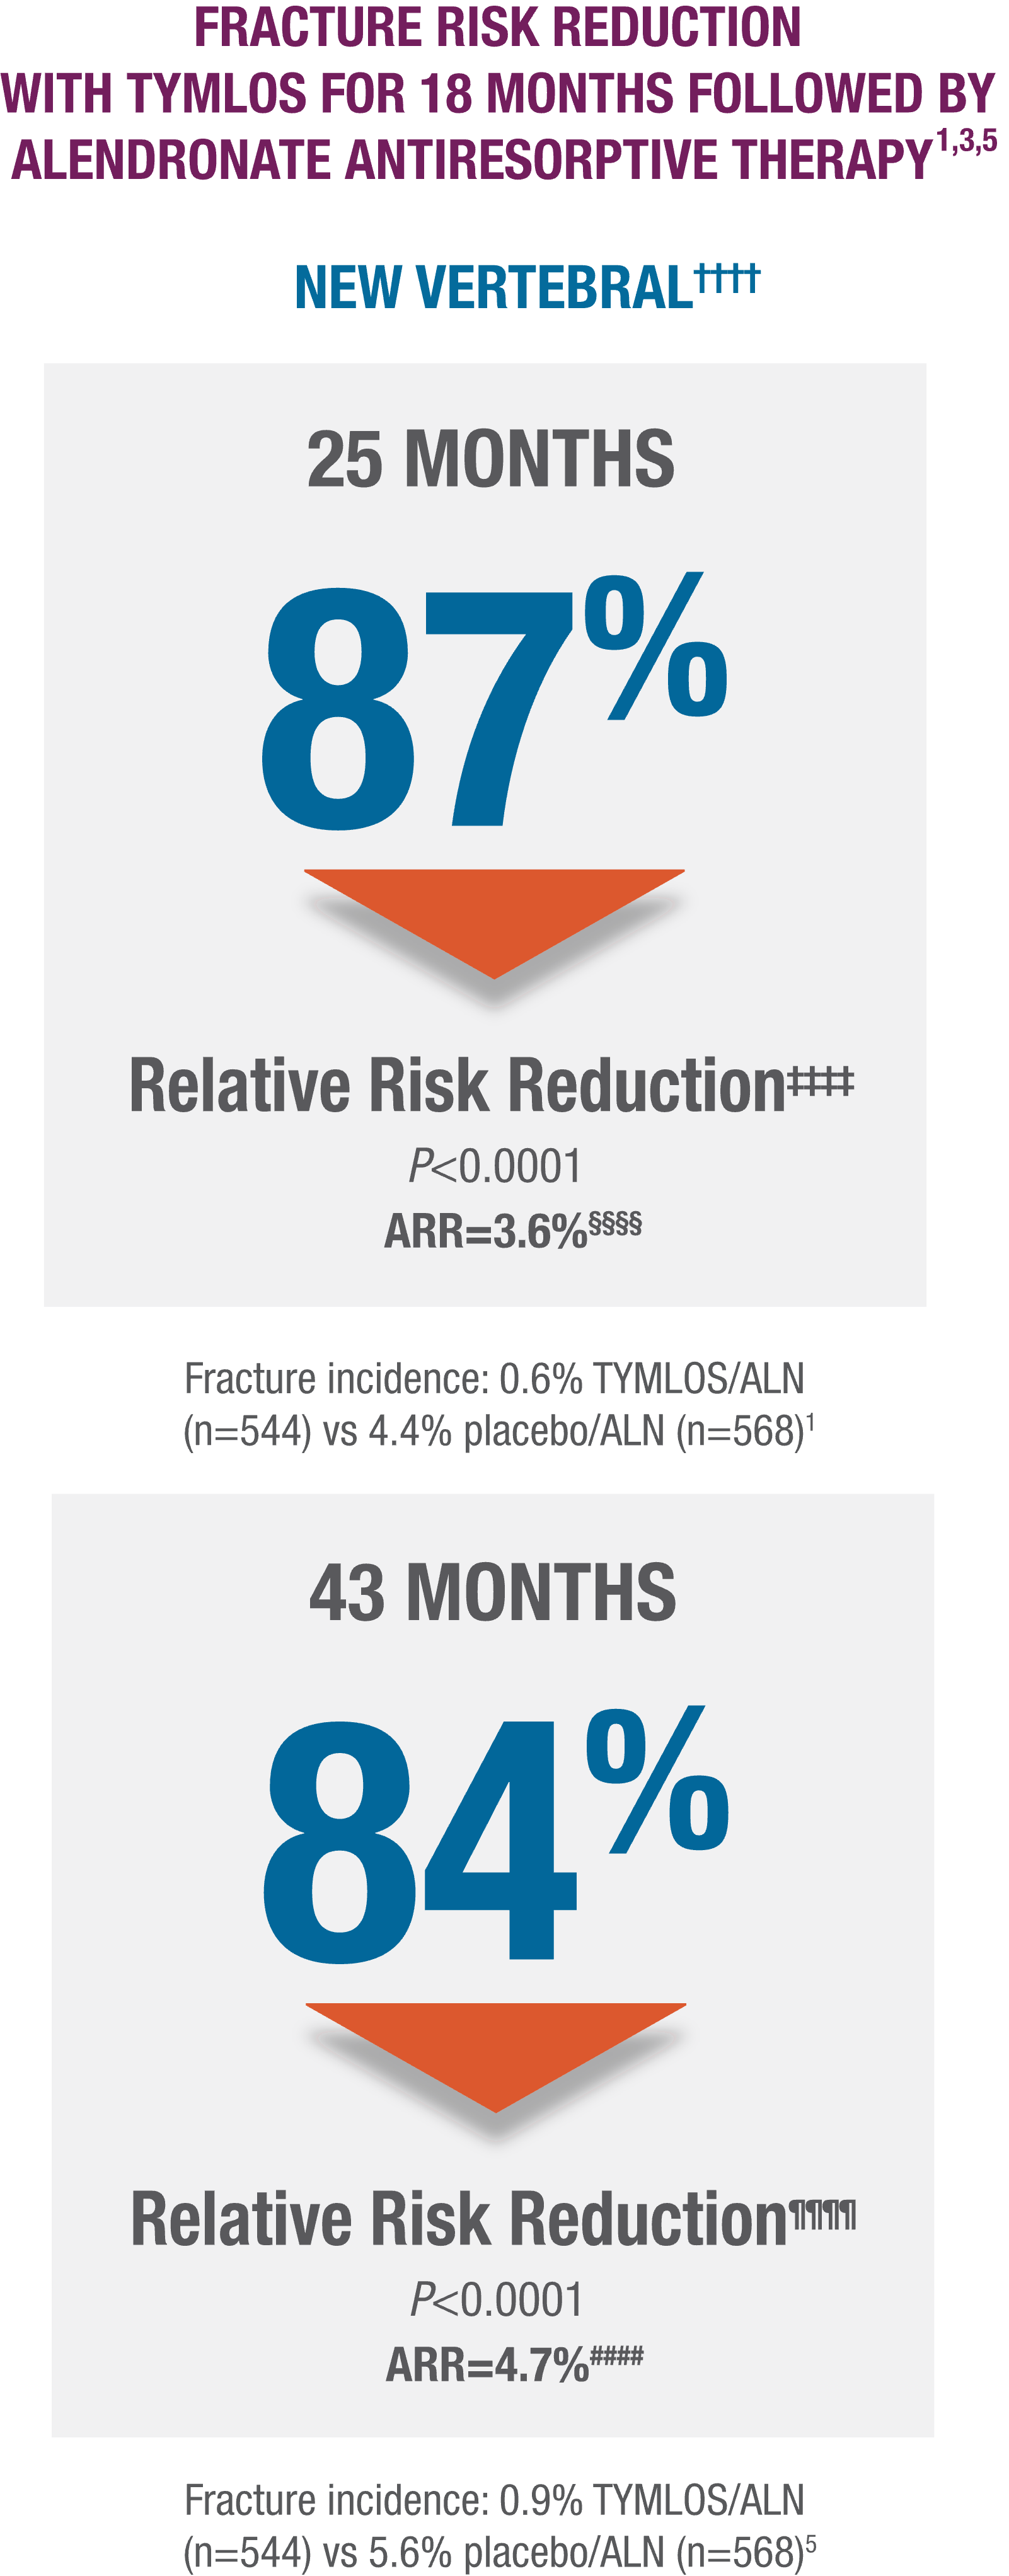 A graph showing the fracture risk reduction with the use of TYMLOS